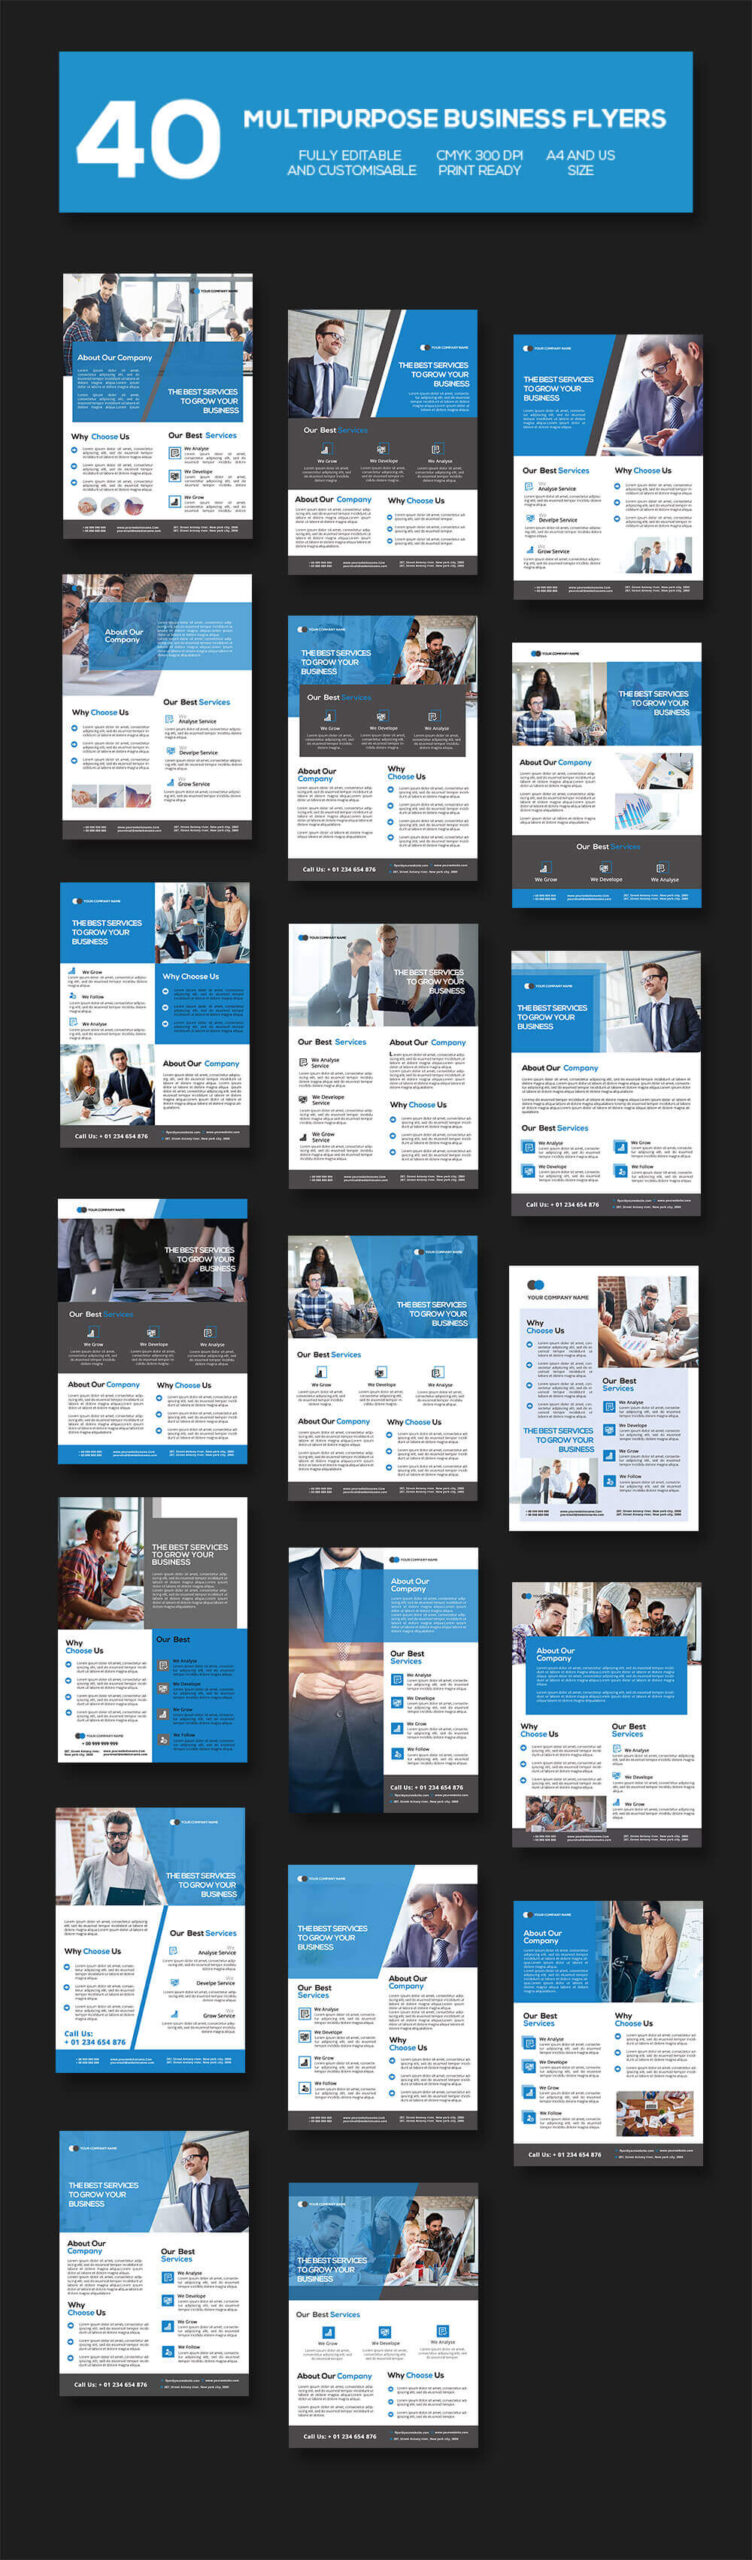 Preview of the multipurpose business flyers in the ready to print templates bundle